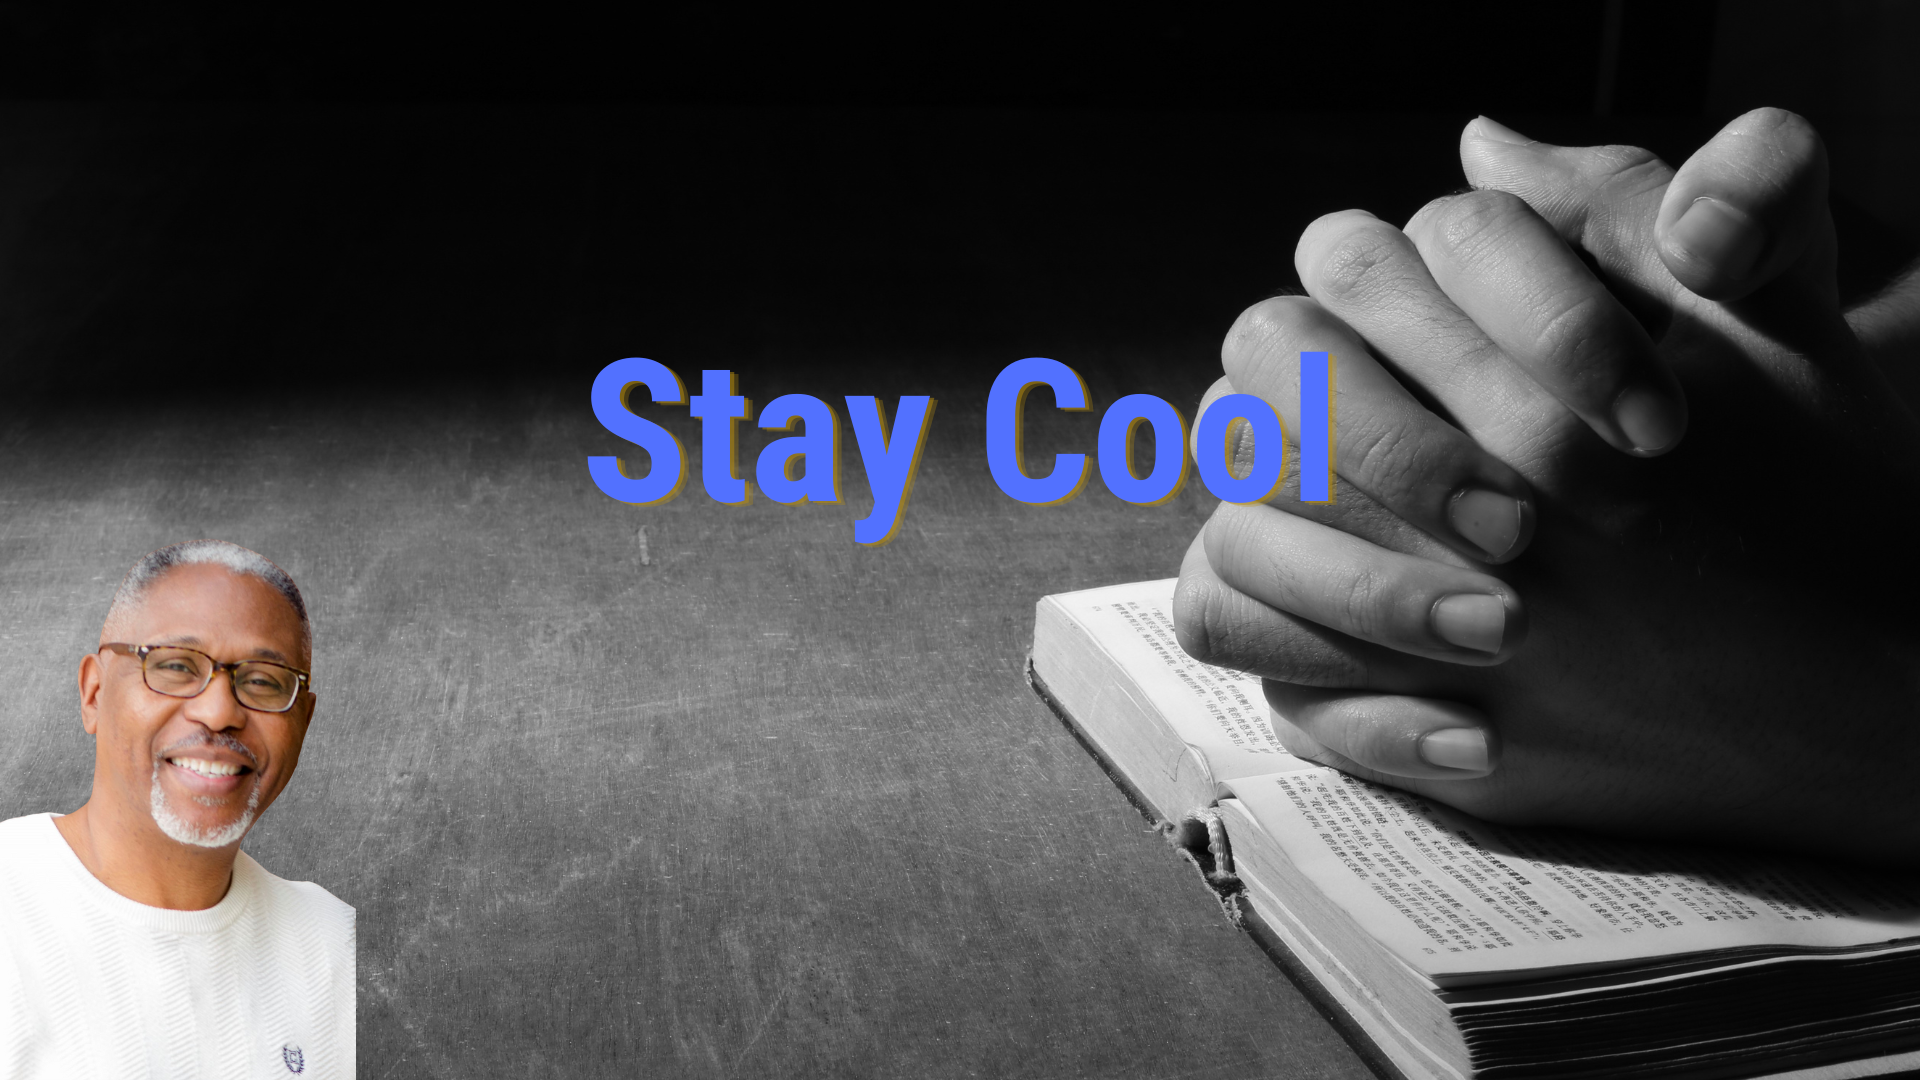 Stay Cool head image